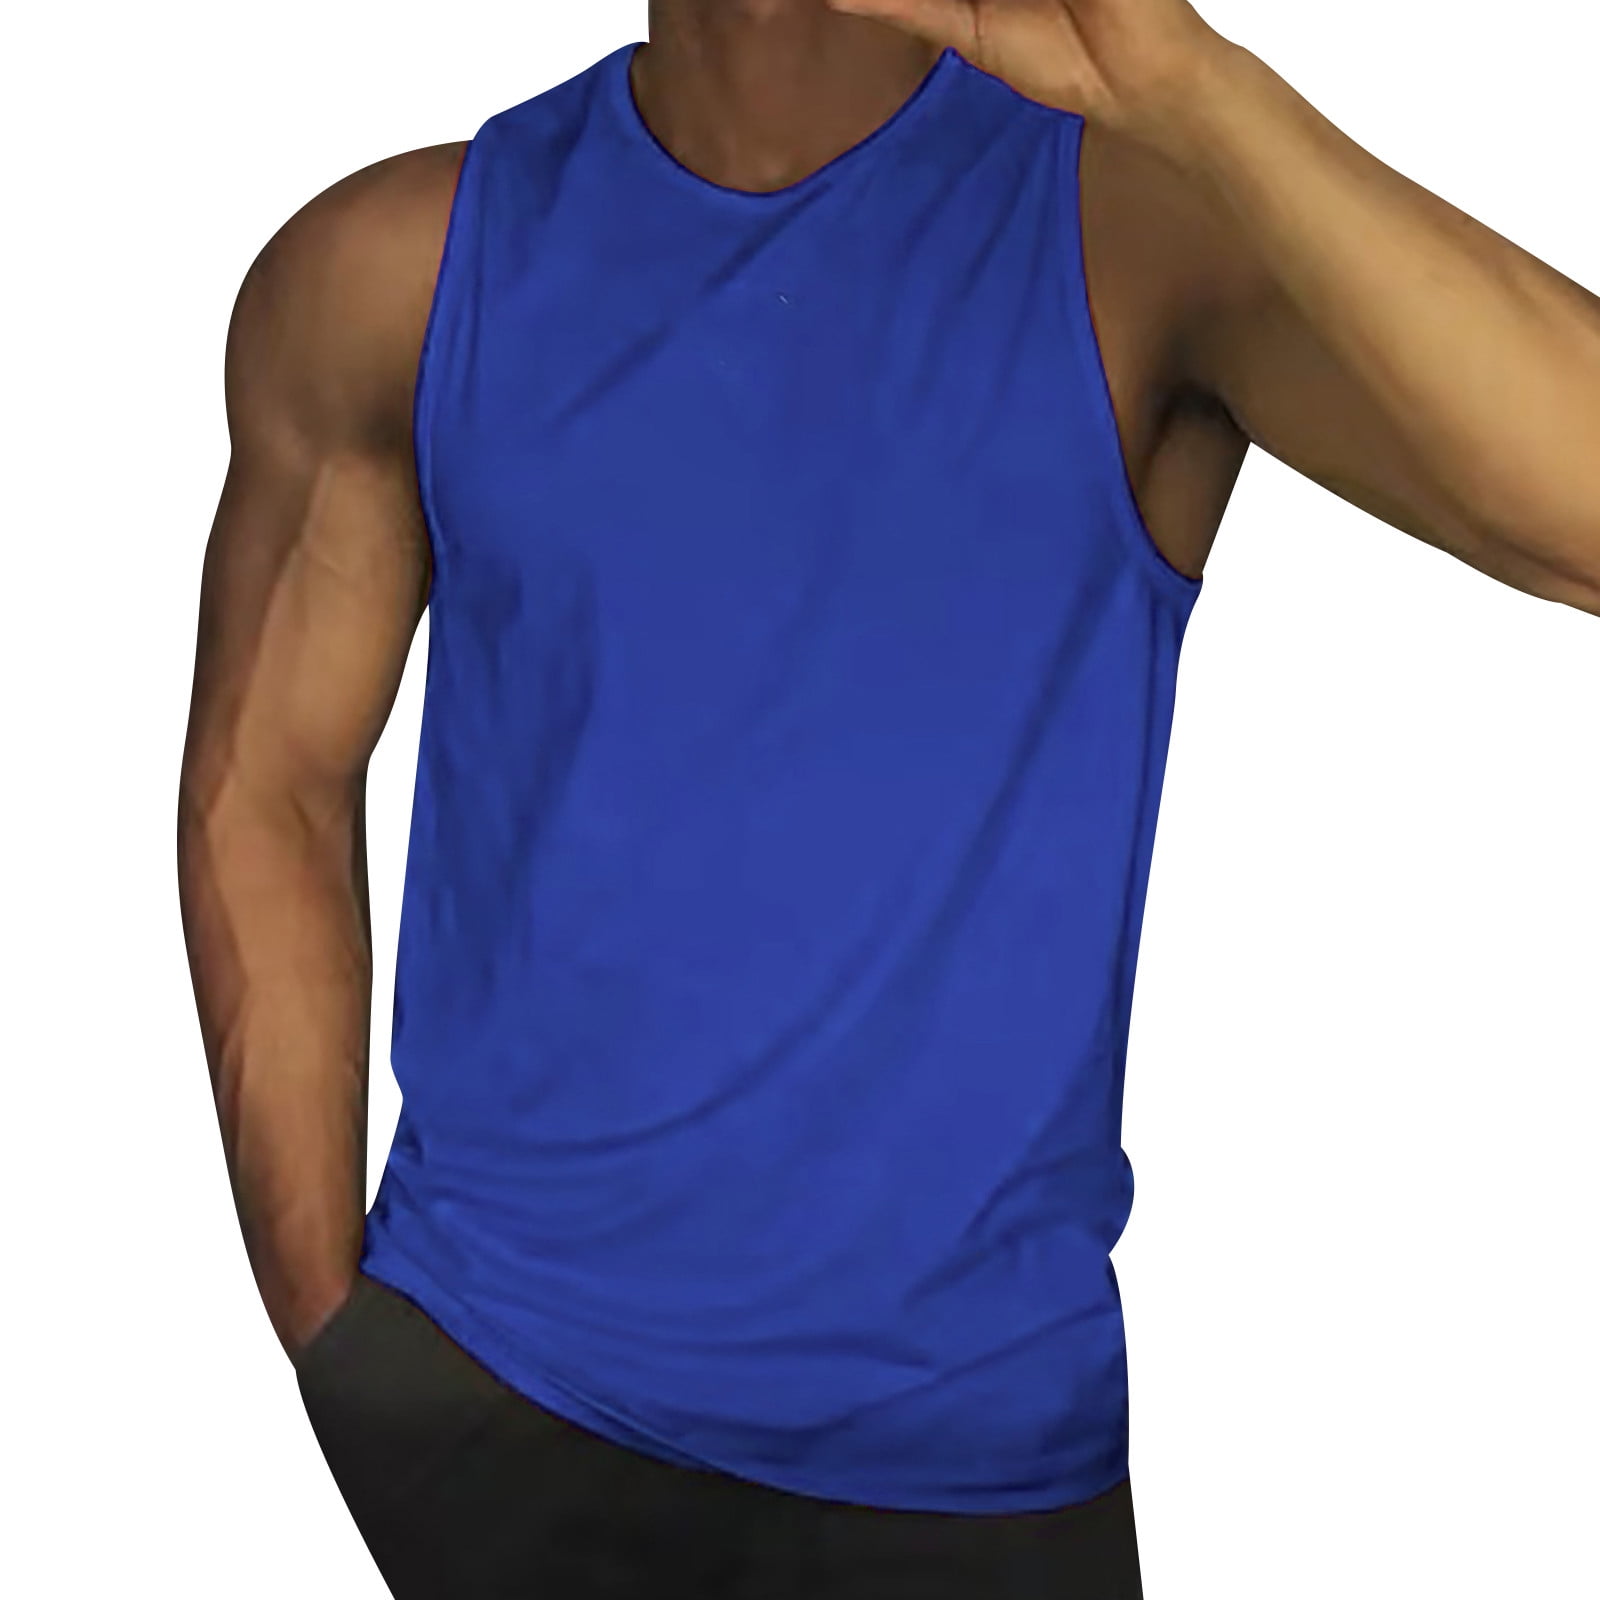 Vedolay Tank Tops For Men,Men's Muscle Workout Tank Tops Gym Fitness ...